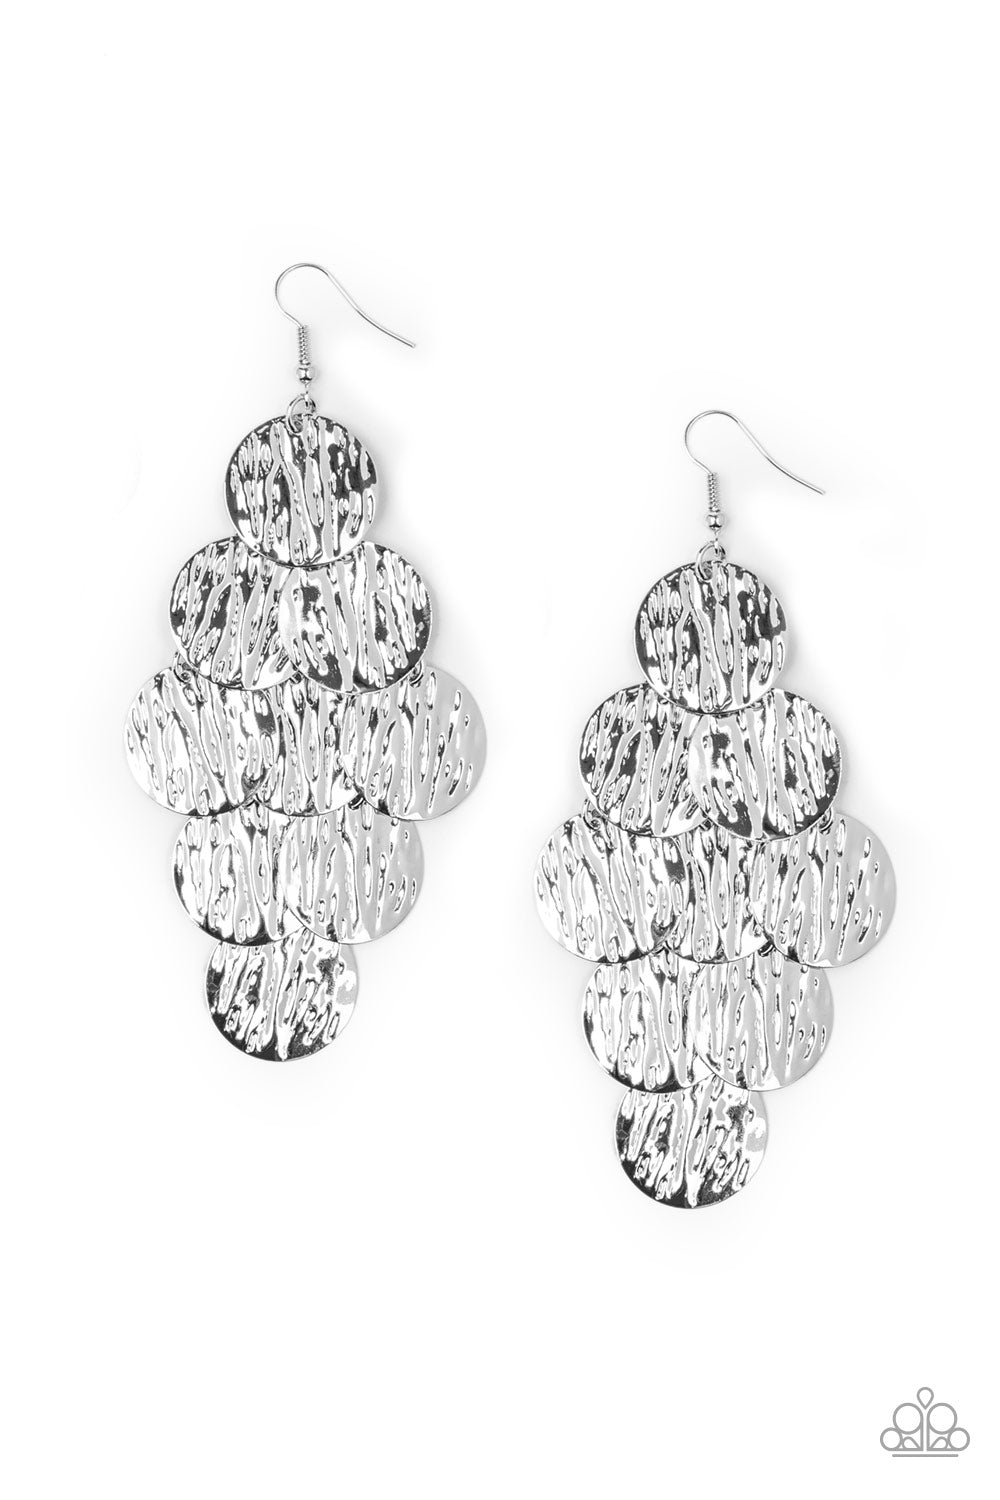 Paparazzi Accessories - Uptown Edge - Silver Earrings